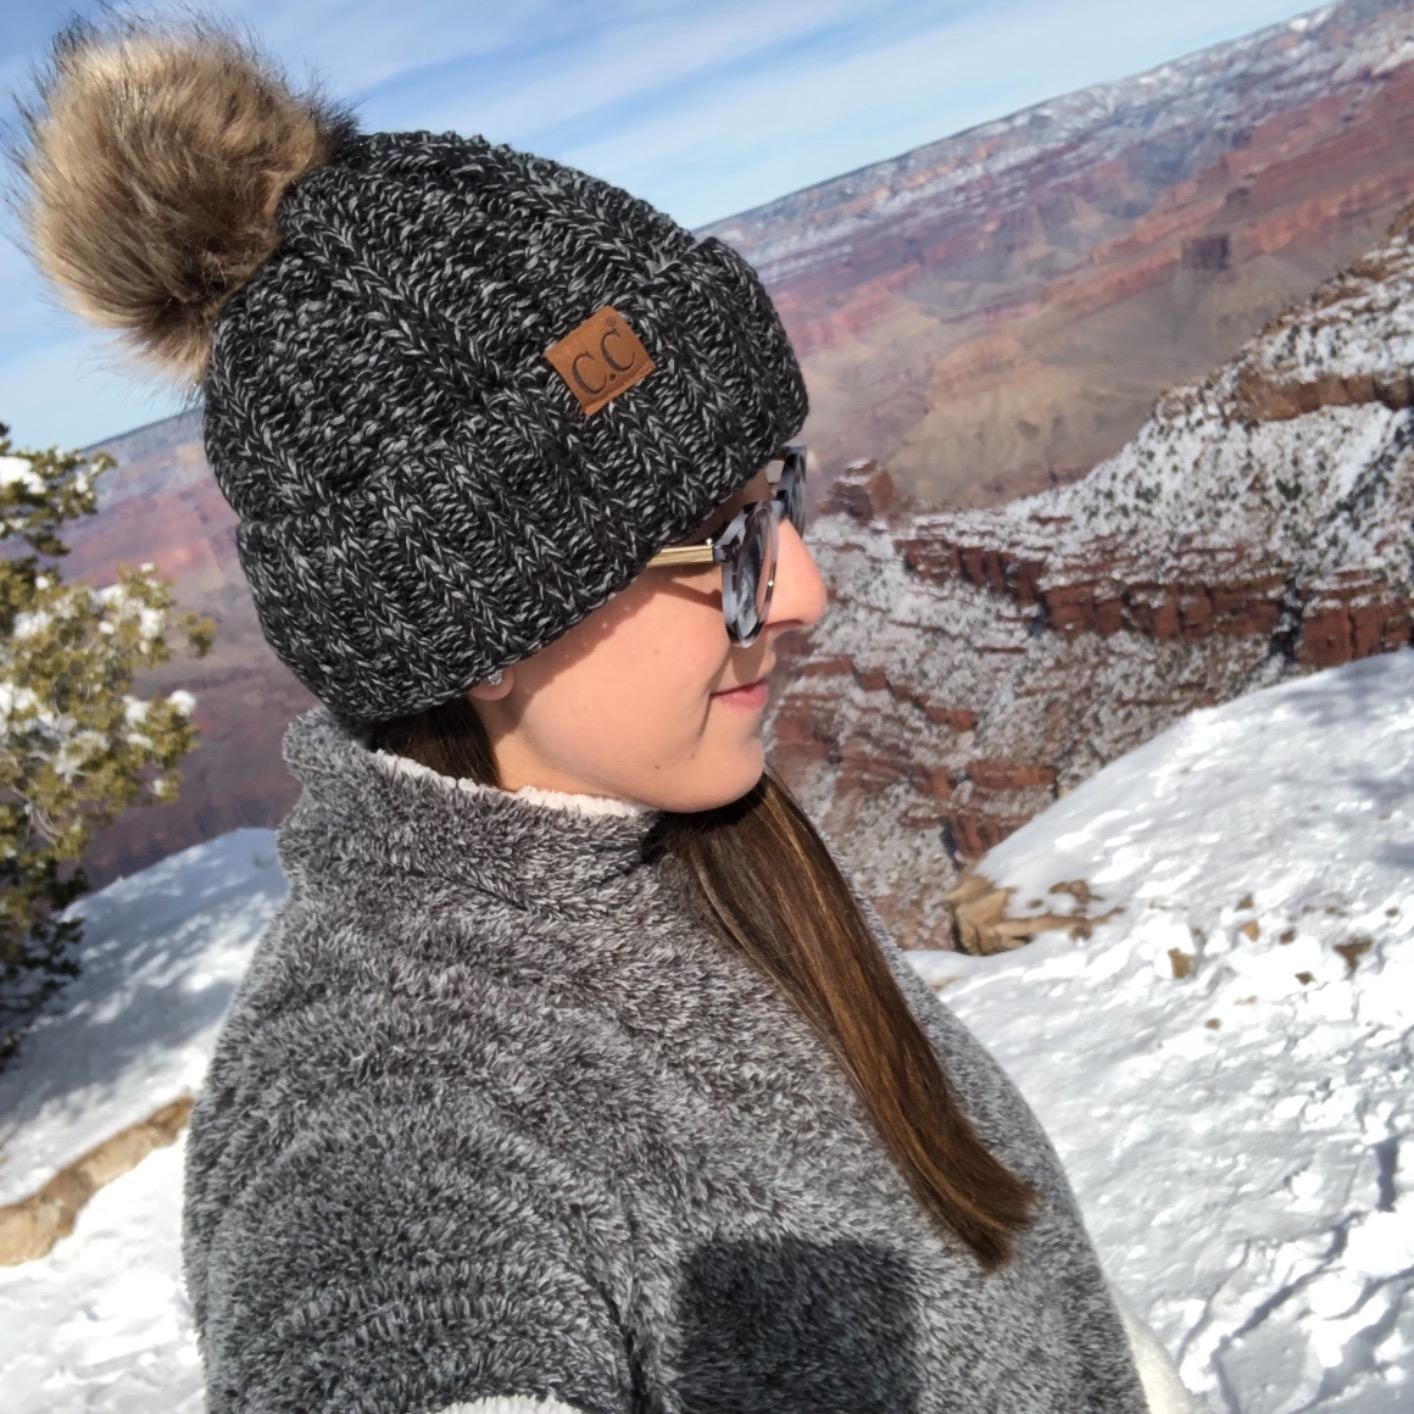 A person wearing the black beanie outside with snowy canyon landscape in the background